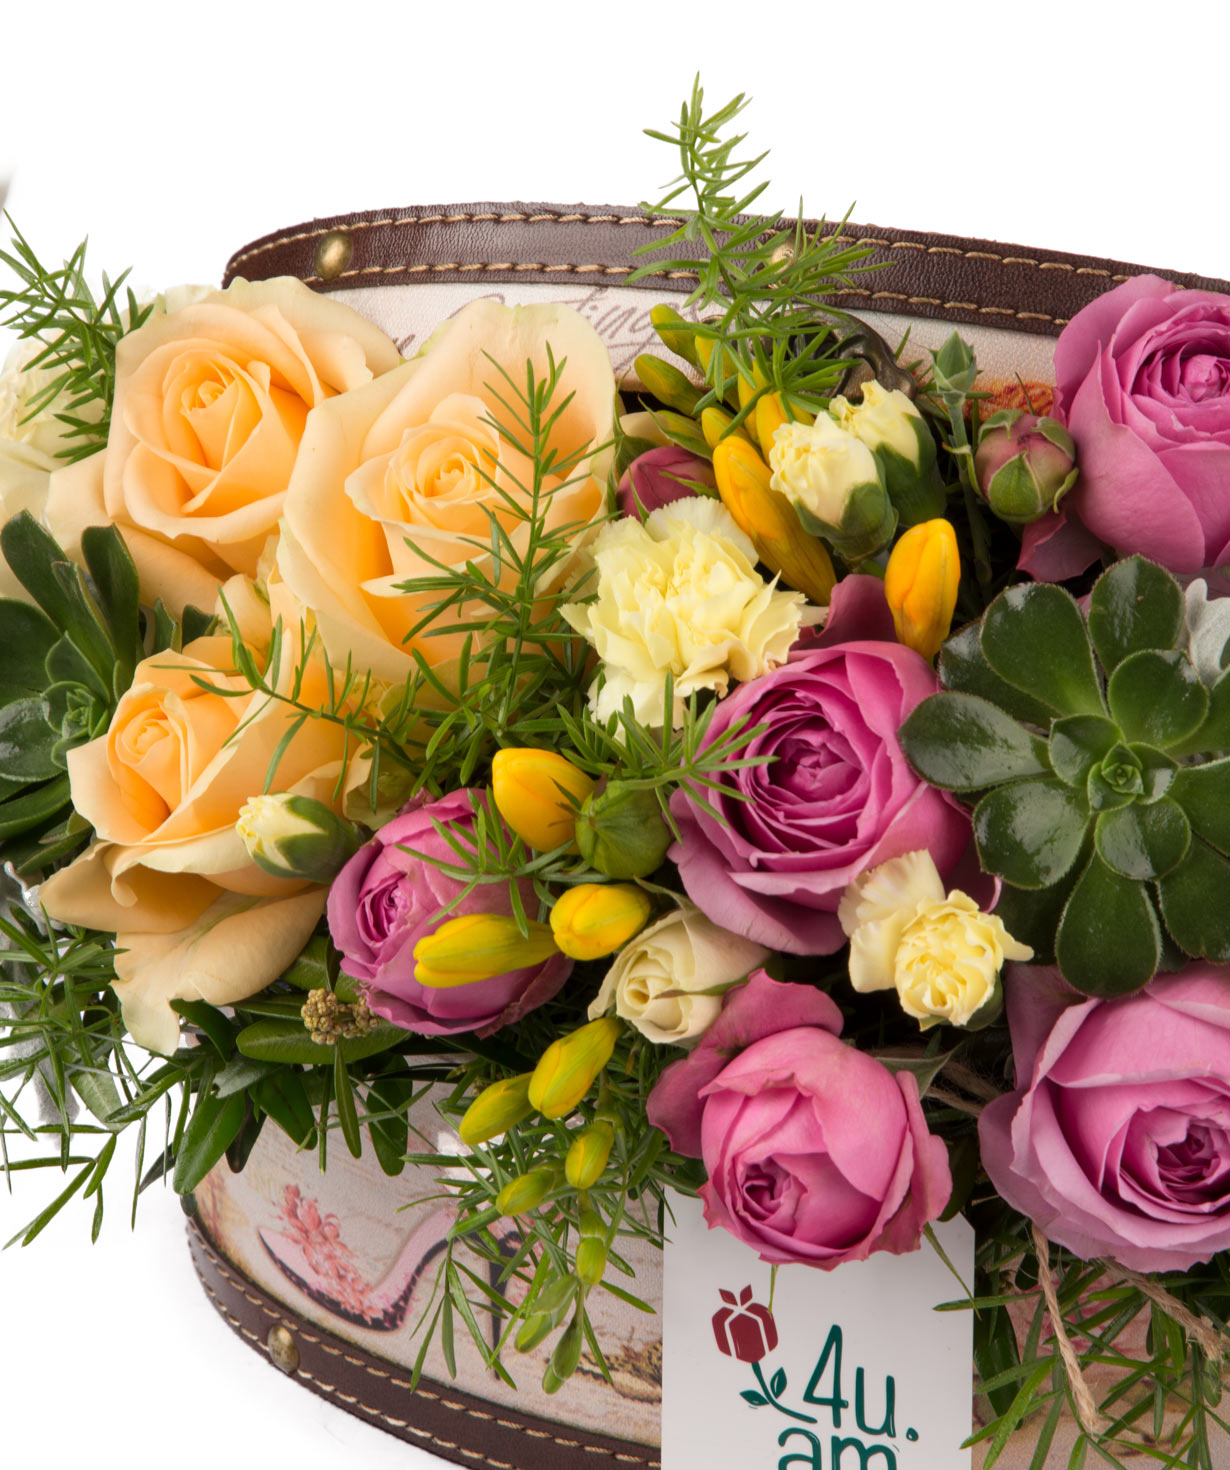 Composition `Jonava` with roses and freesias